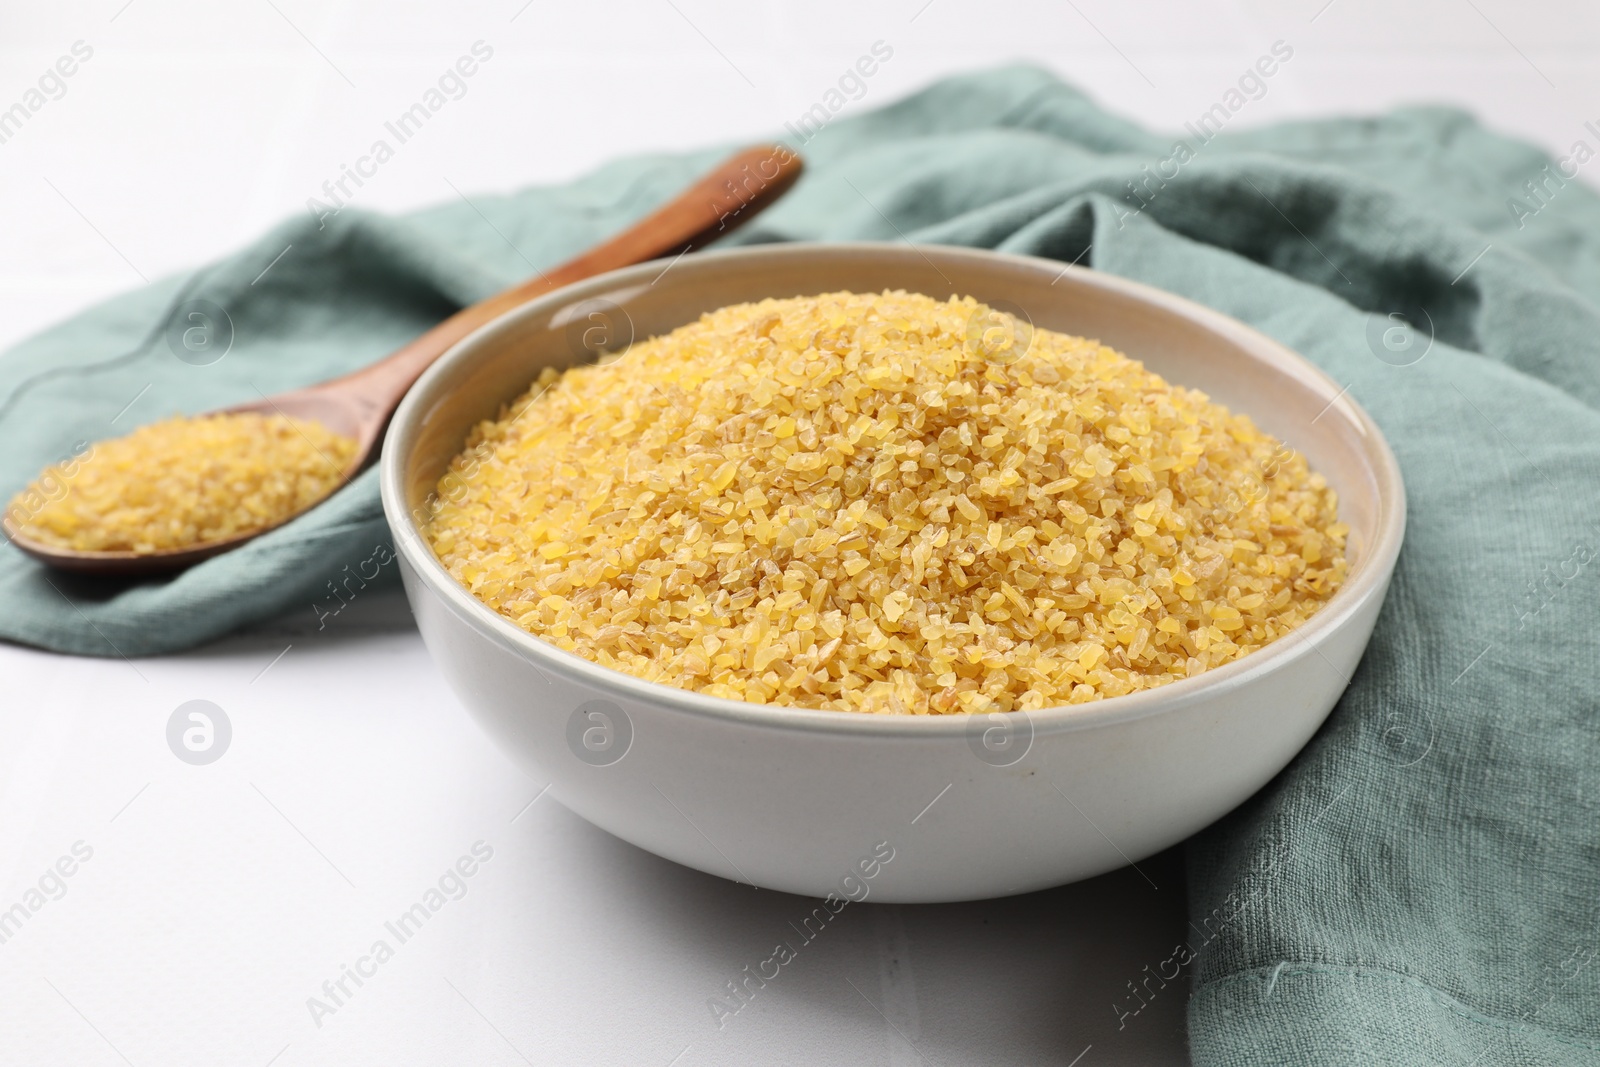 Photo of Bowl and spoon with raw bulgur on white tiled table